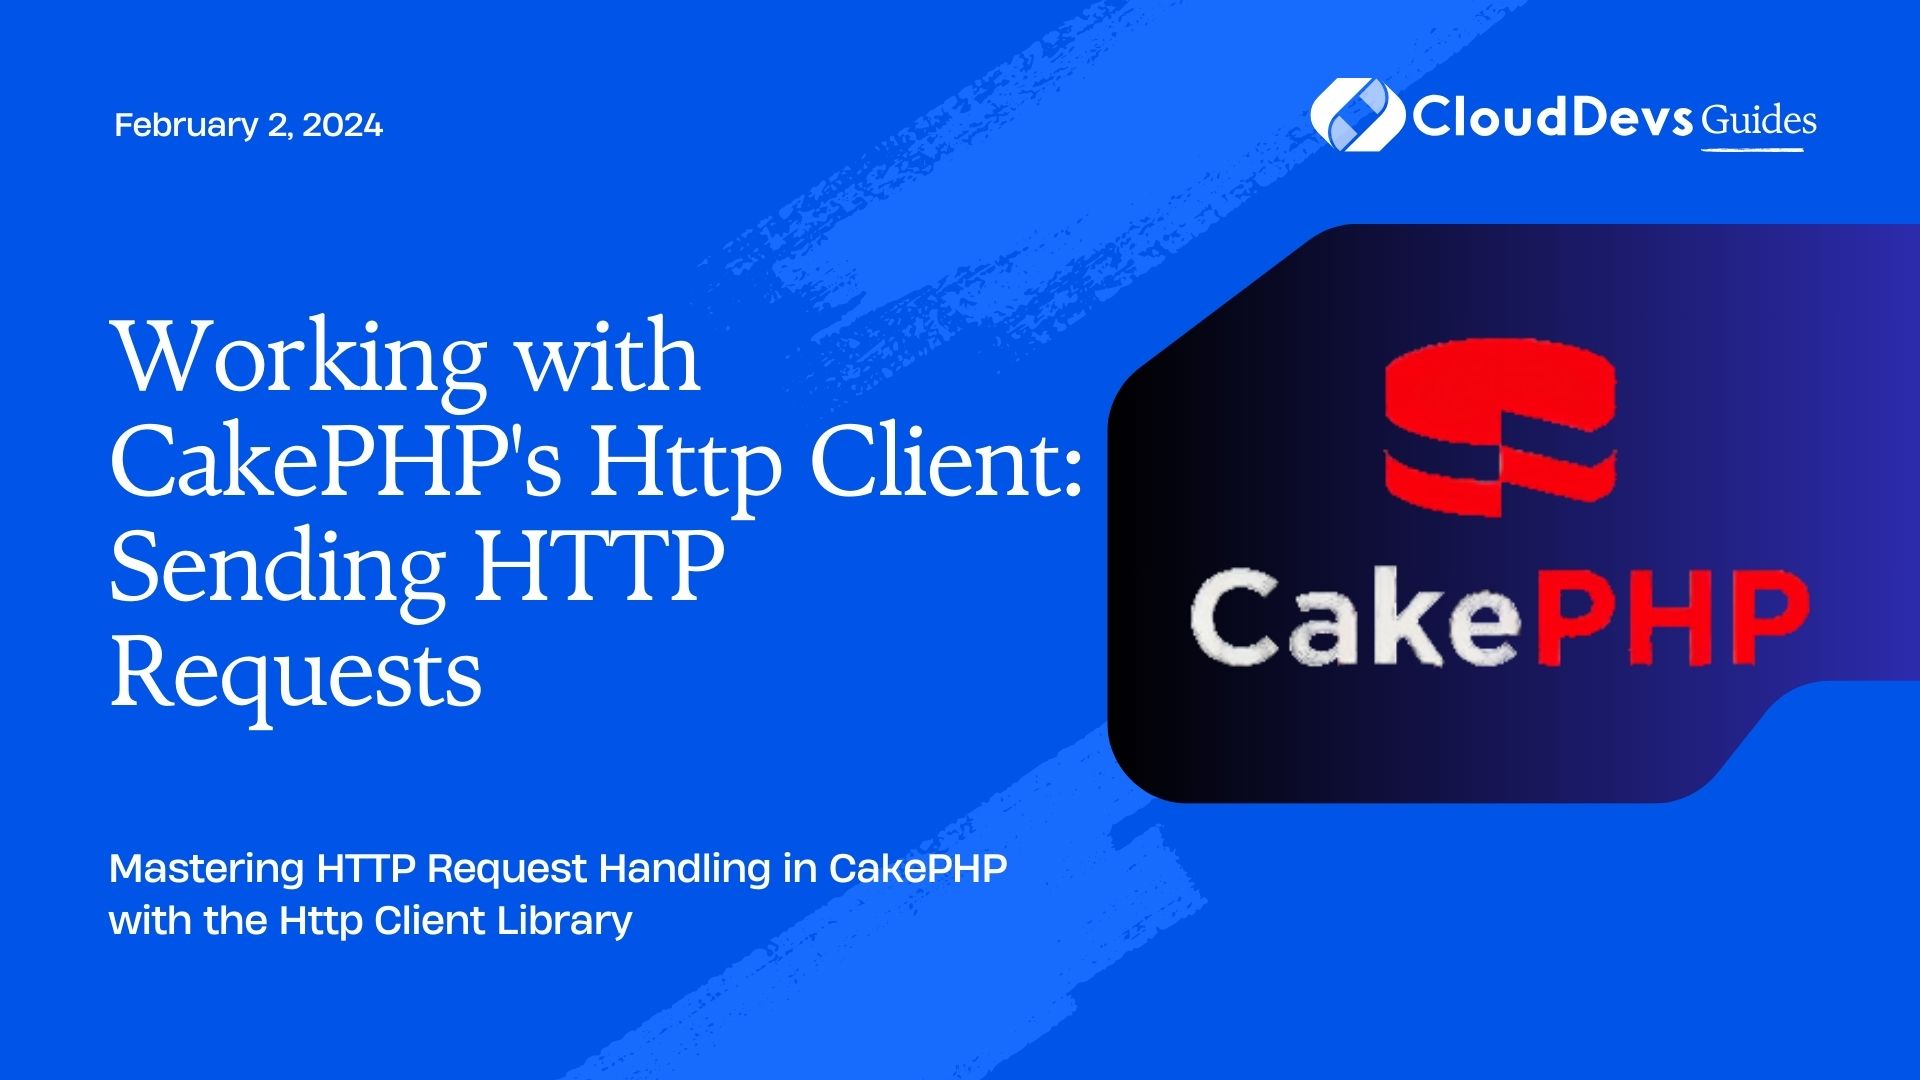 Working with CakePHP's Http Client: Sending HTTP Requests